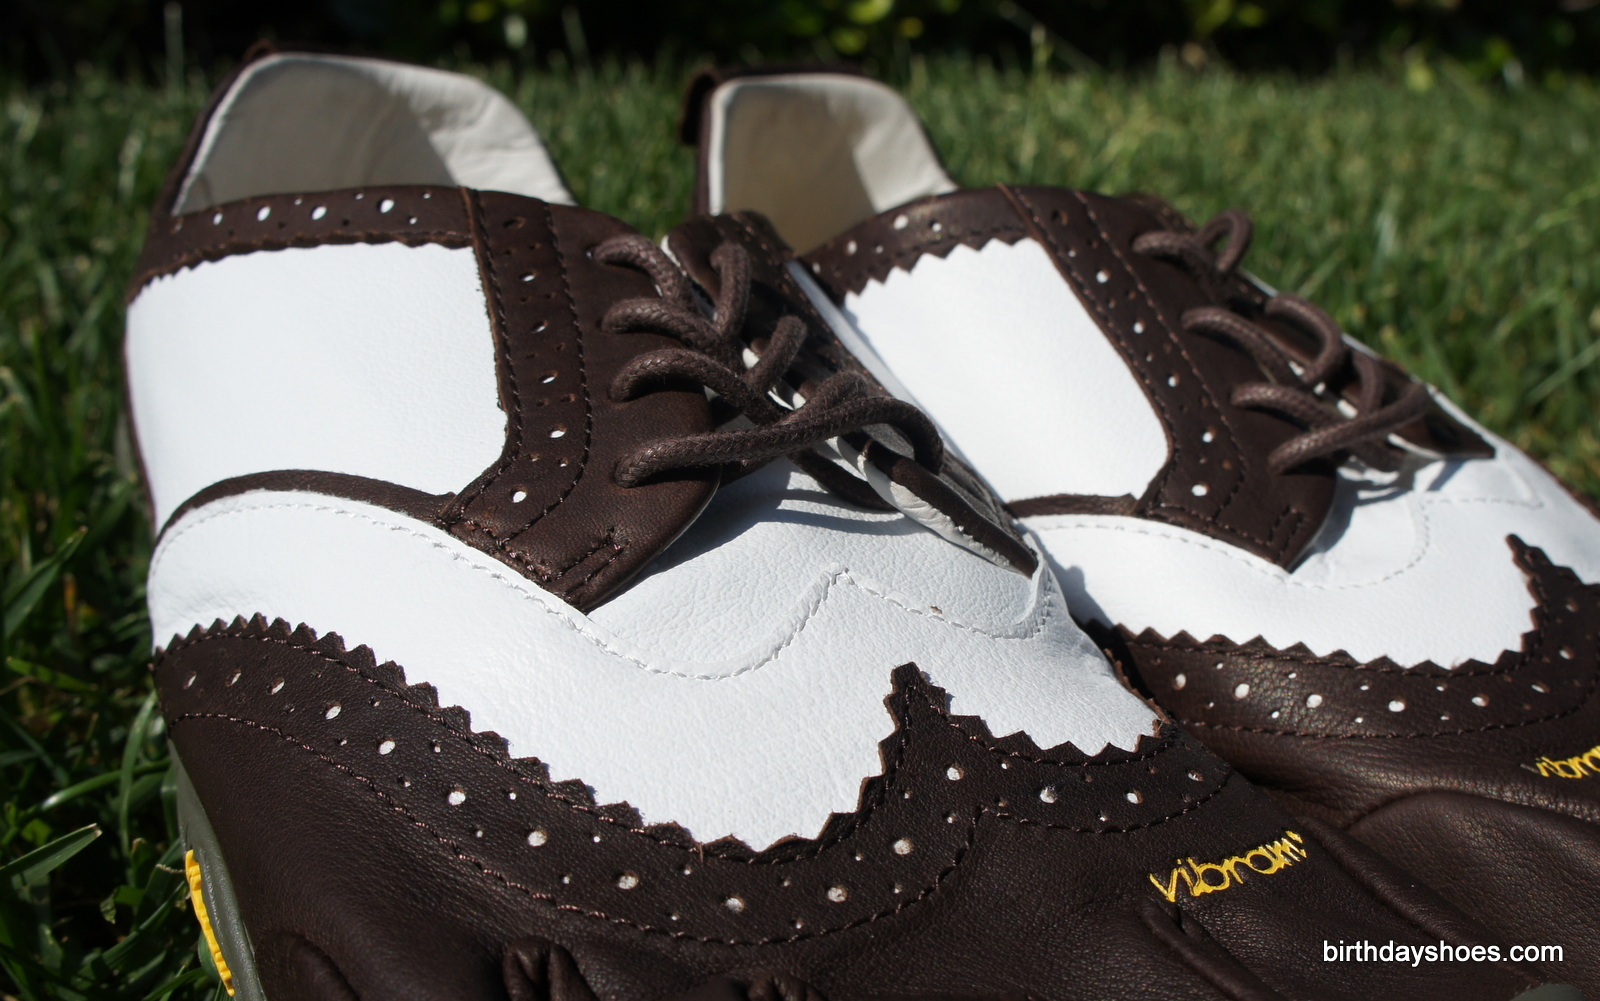 The two-toned wingtip design gives these shoes a nice look.